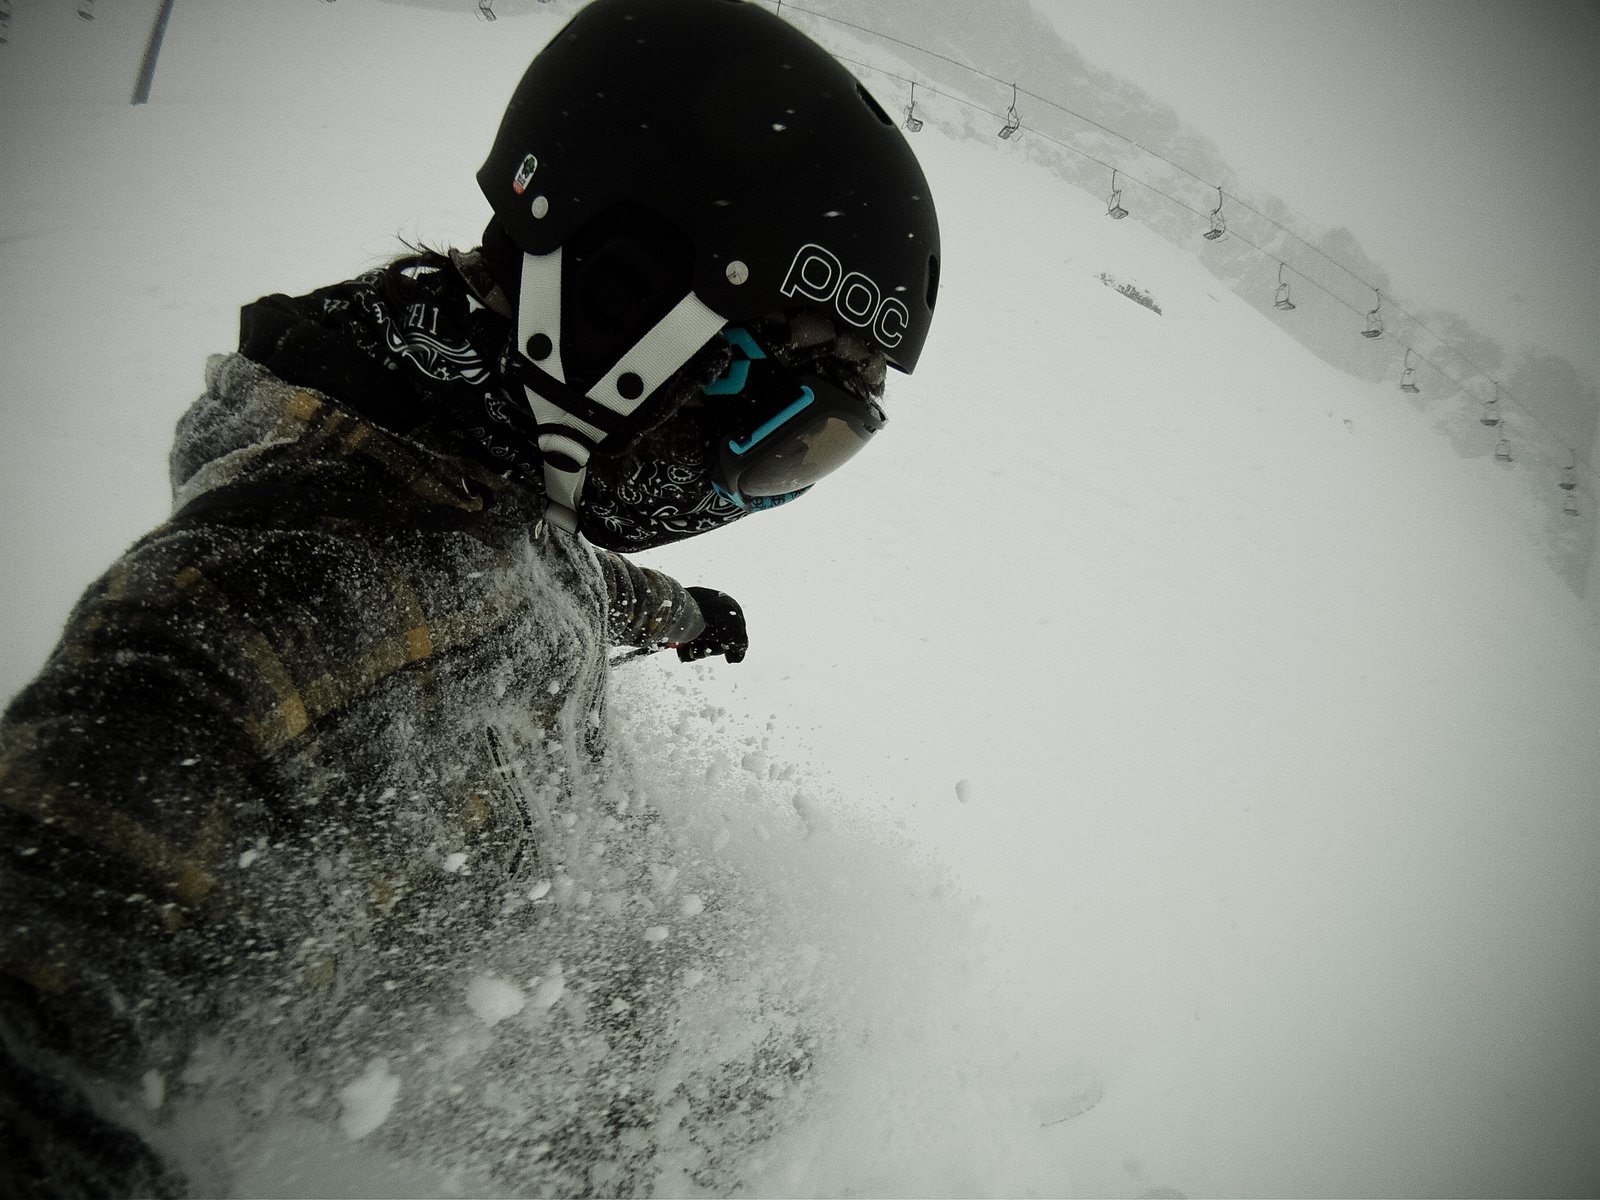 Powder skiing, just like in the movies !